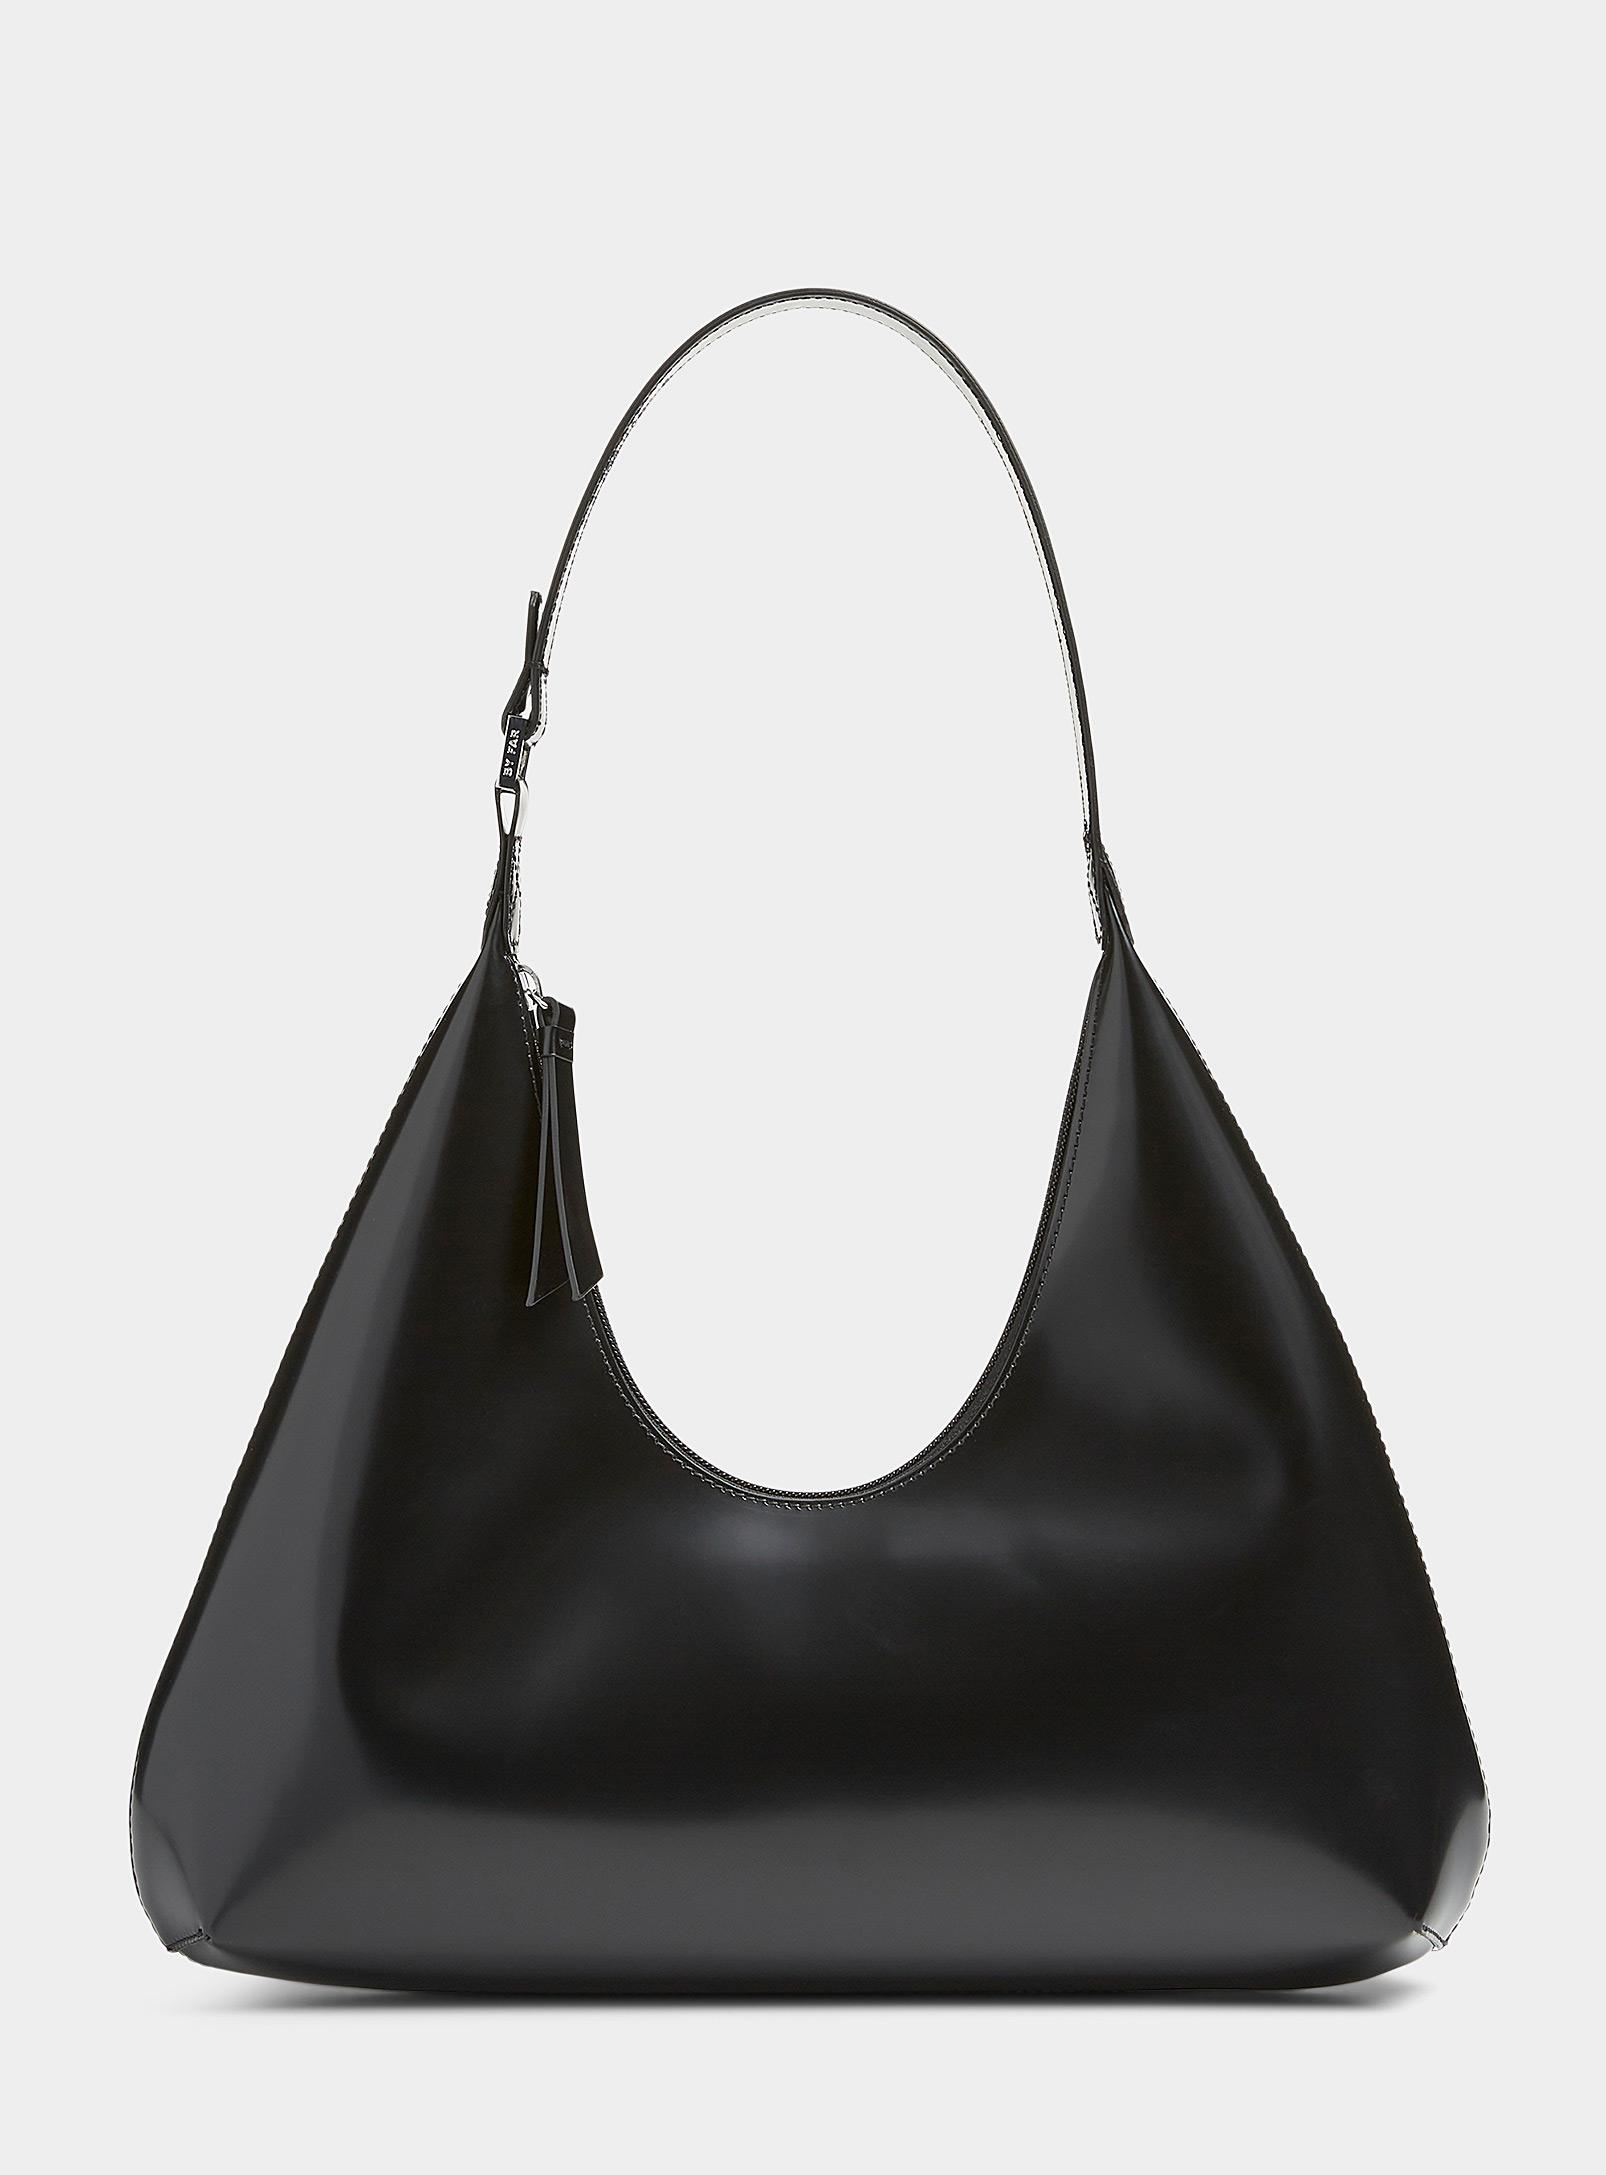 BY FAR Amber Smooth Leather Bag in Black | Lyst Canada